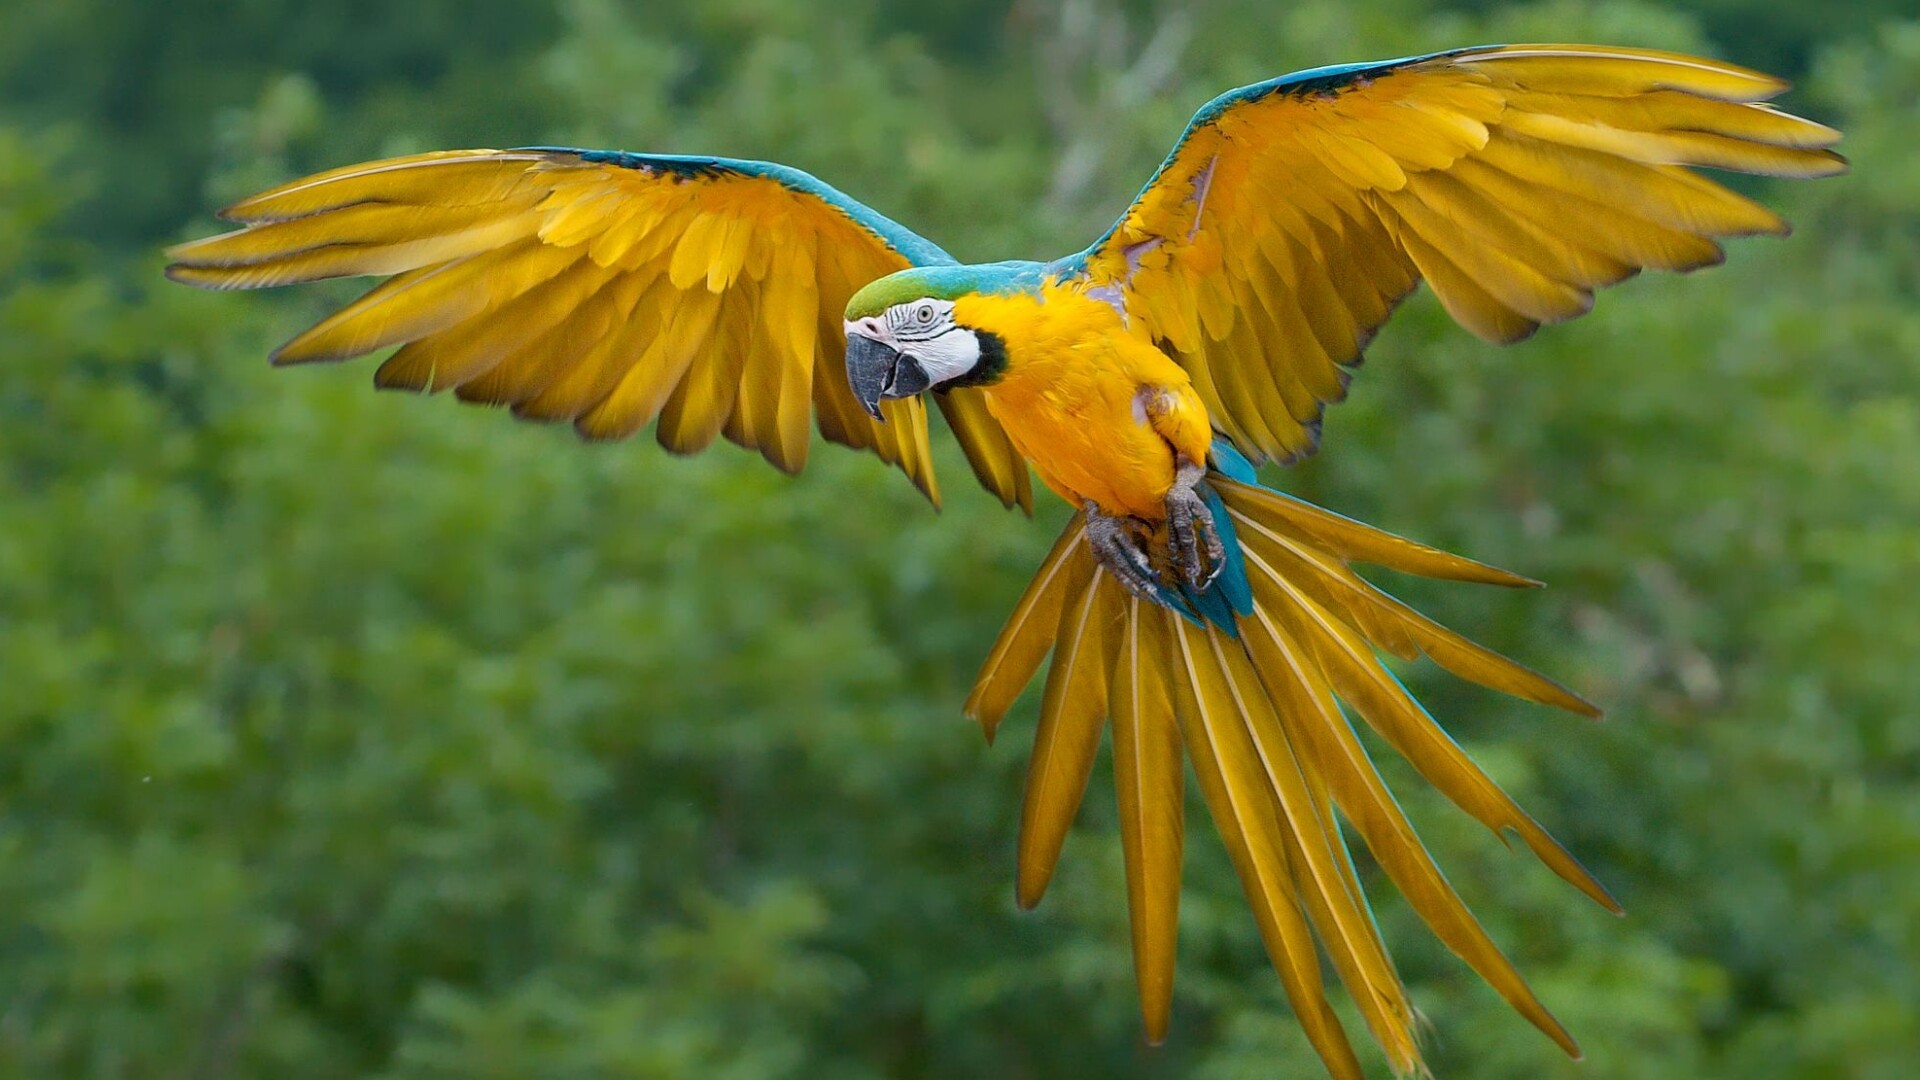 Bird: Macaw, A group of New World parrots that are long-tailed and often colorful. 1920x1080 Full HD Background.